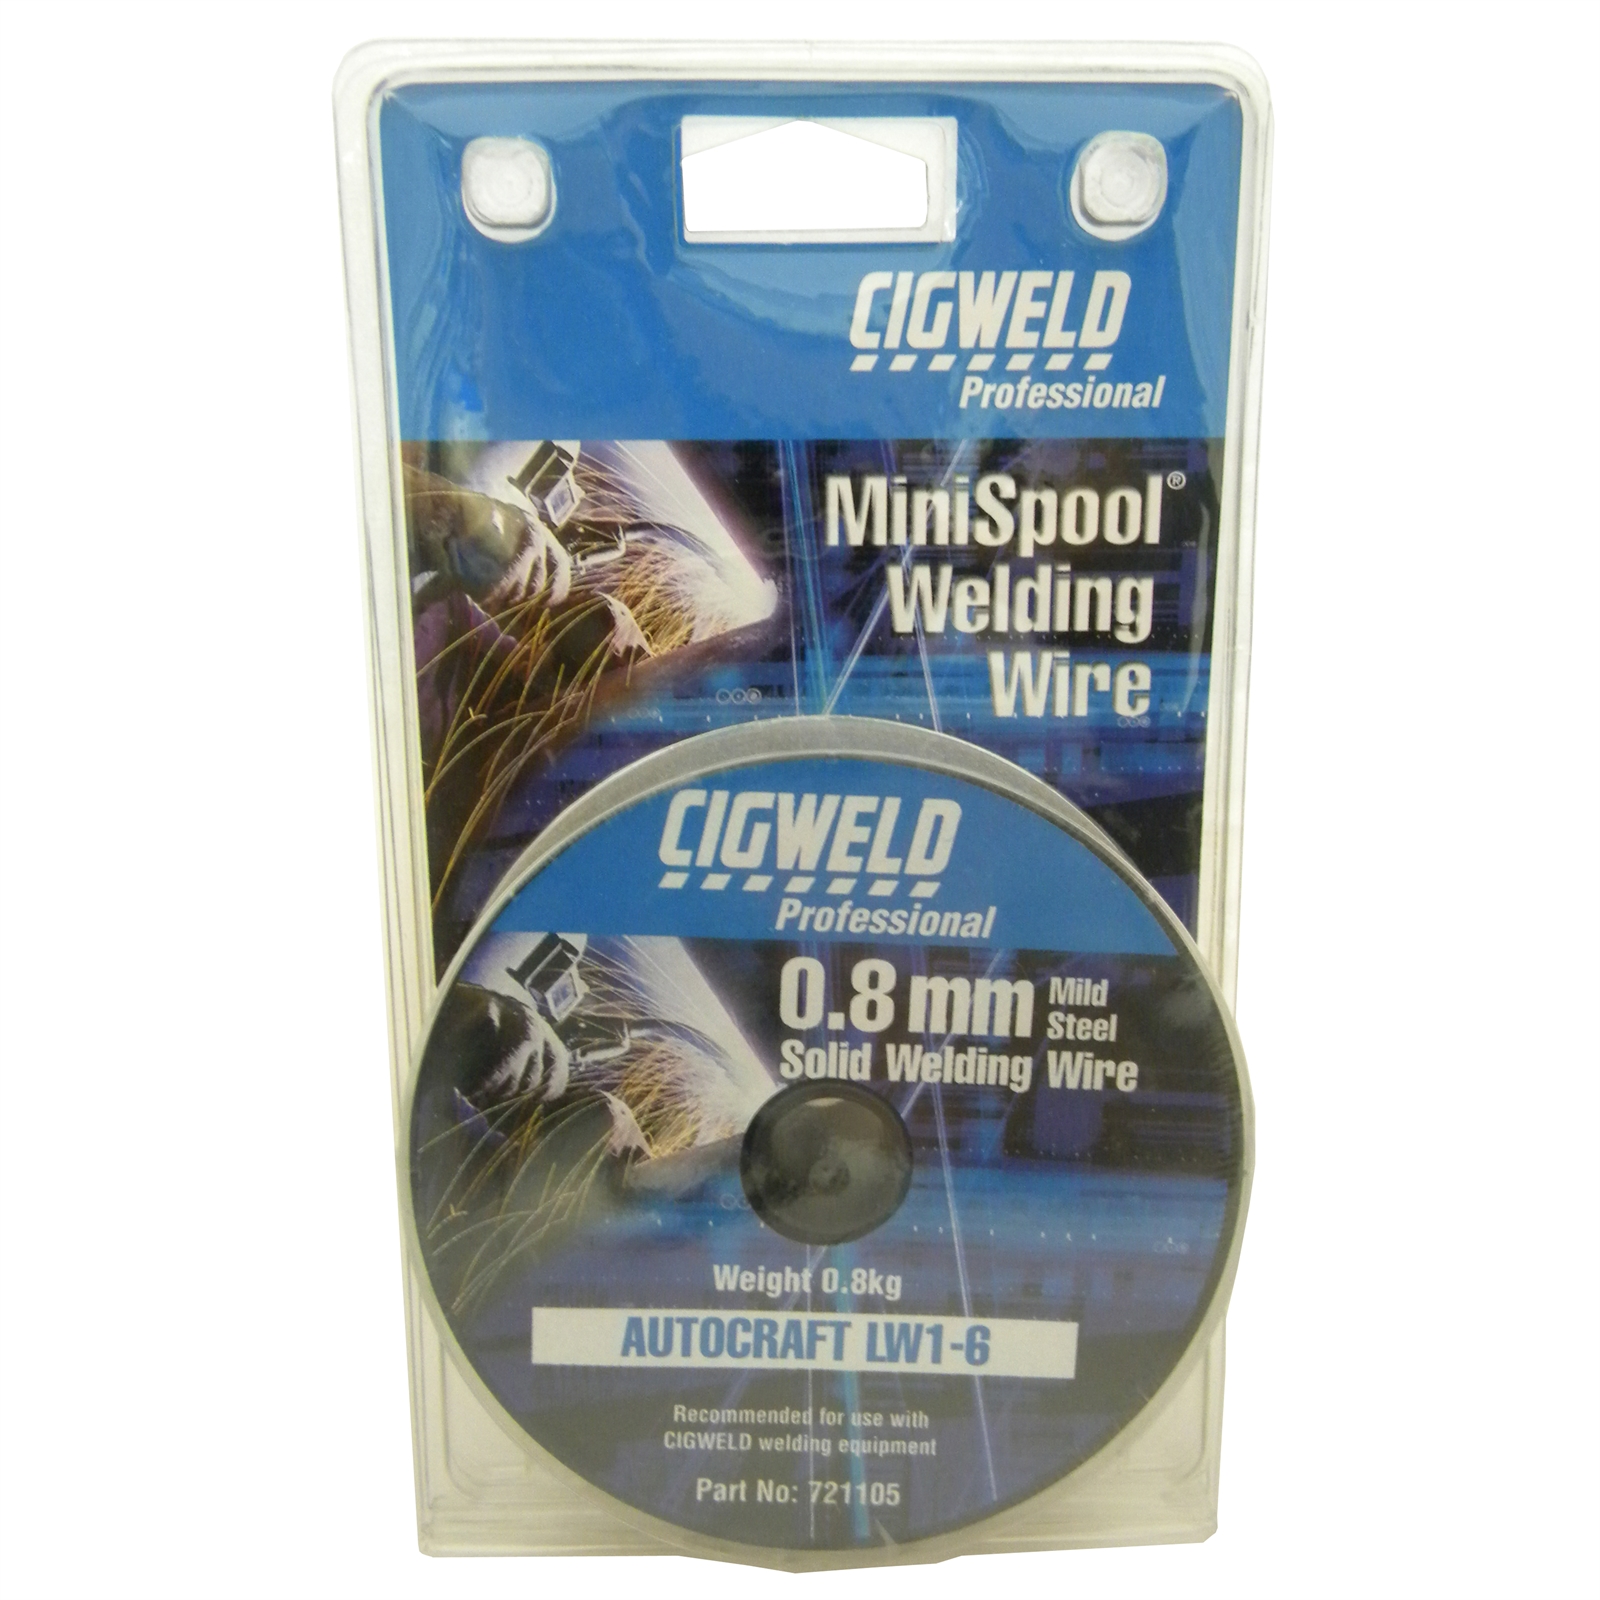 Cigweld 0.8mm x 0.8kg Solid MIG Welding Wire